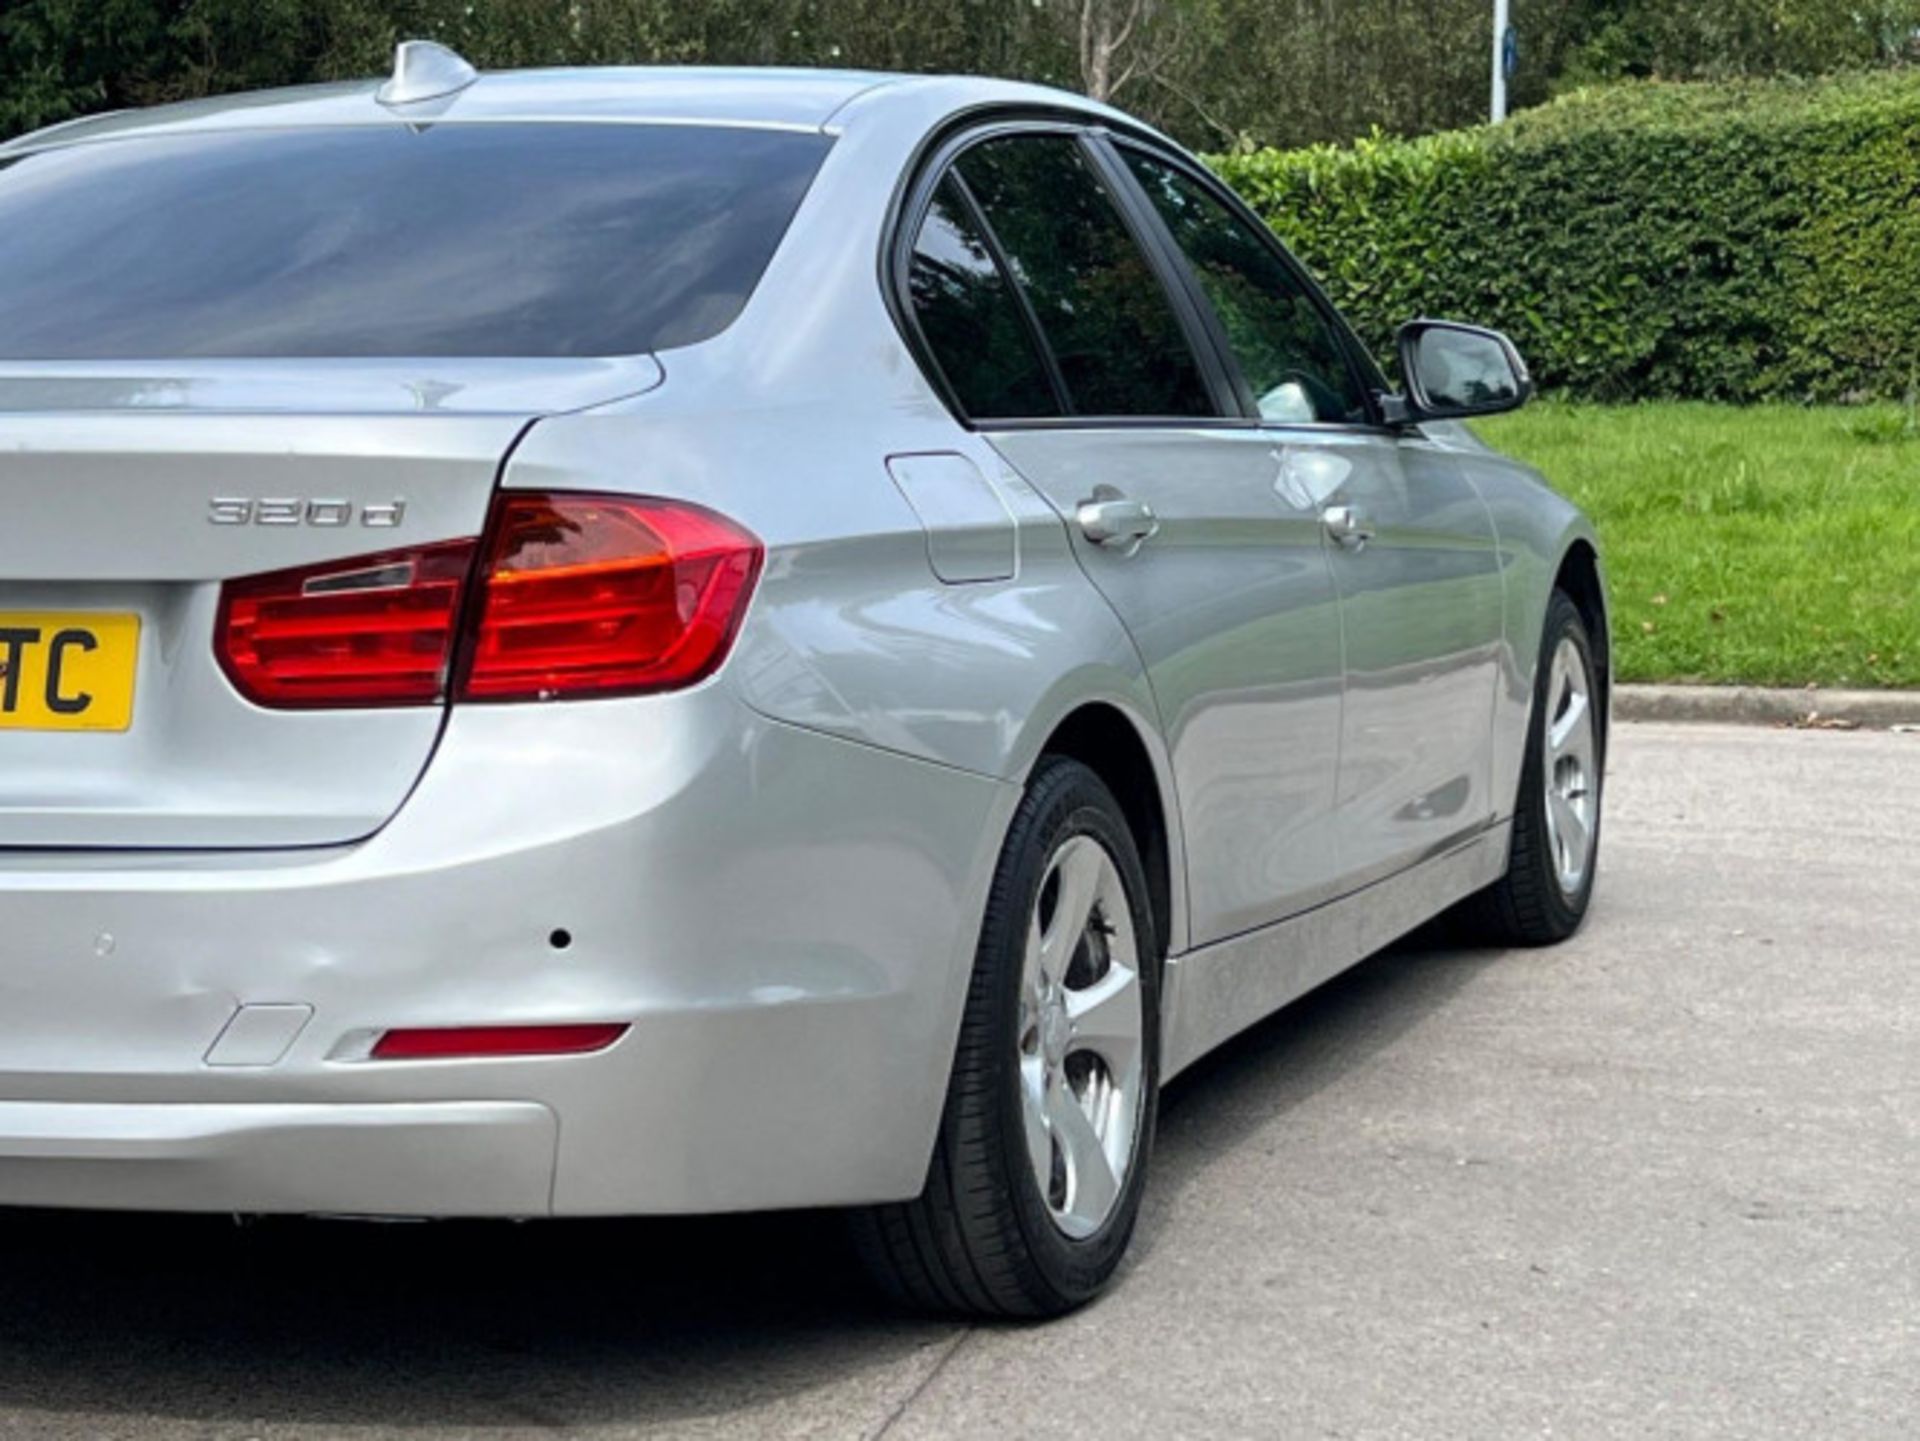 BMW 3 SERIES 2.0 DIESEL ED START STOP - A WELL-MAINTAINED GEM >>--NO VAT ON HAMMER--<< - Image 217 of 229